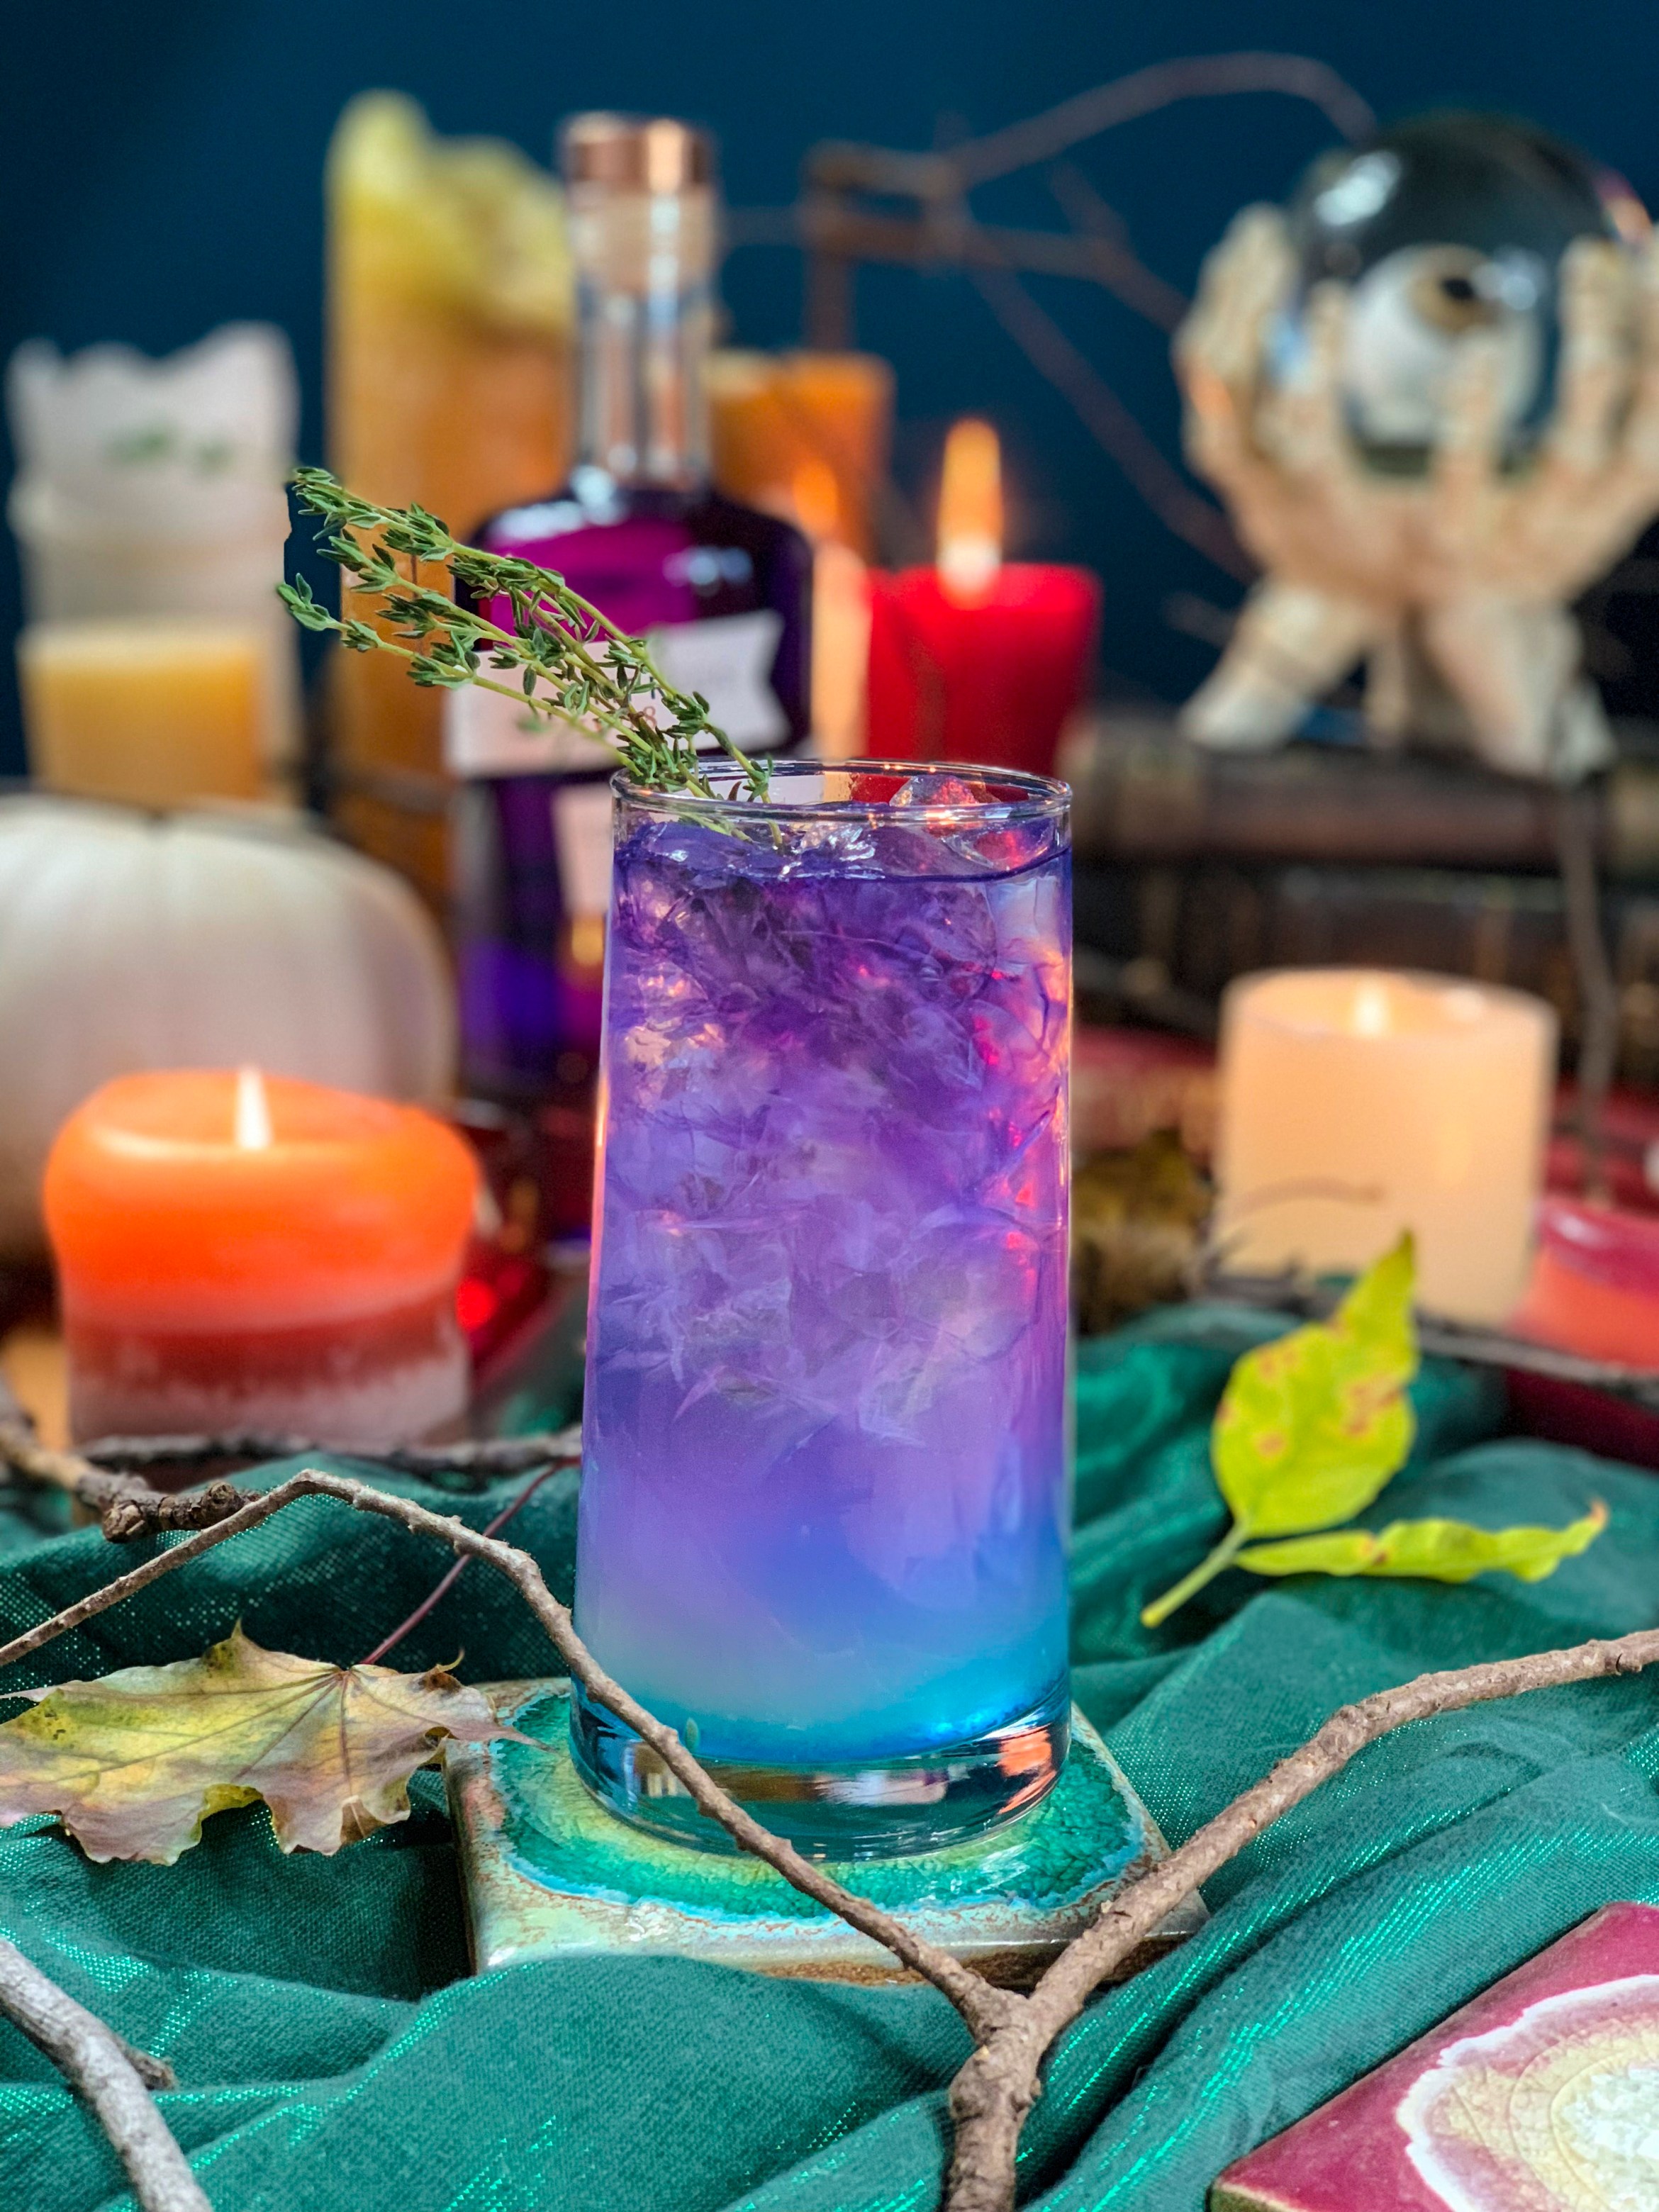 The Top Chosen Spooky Halloween Cocktails